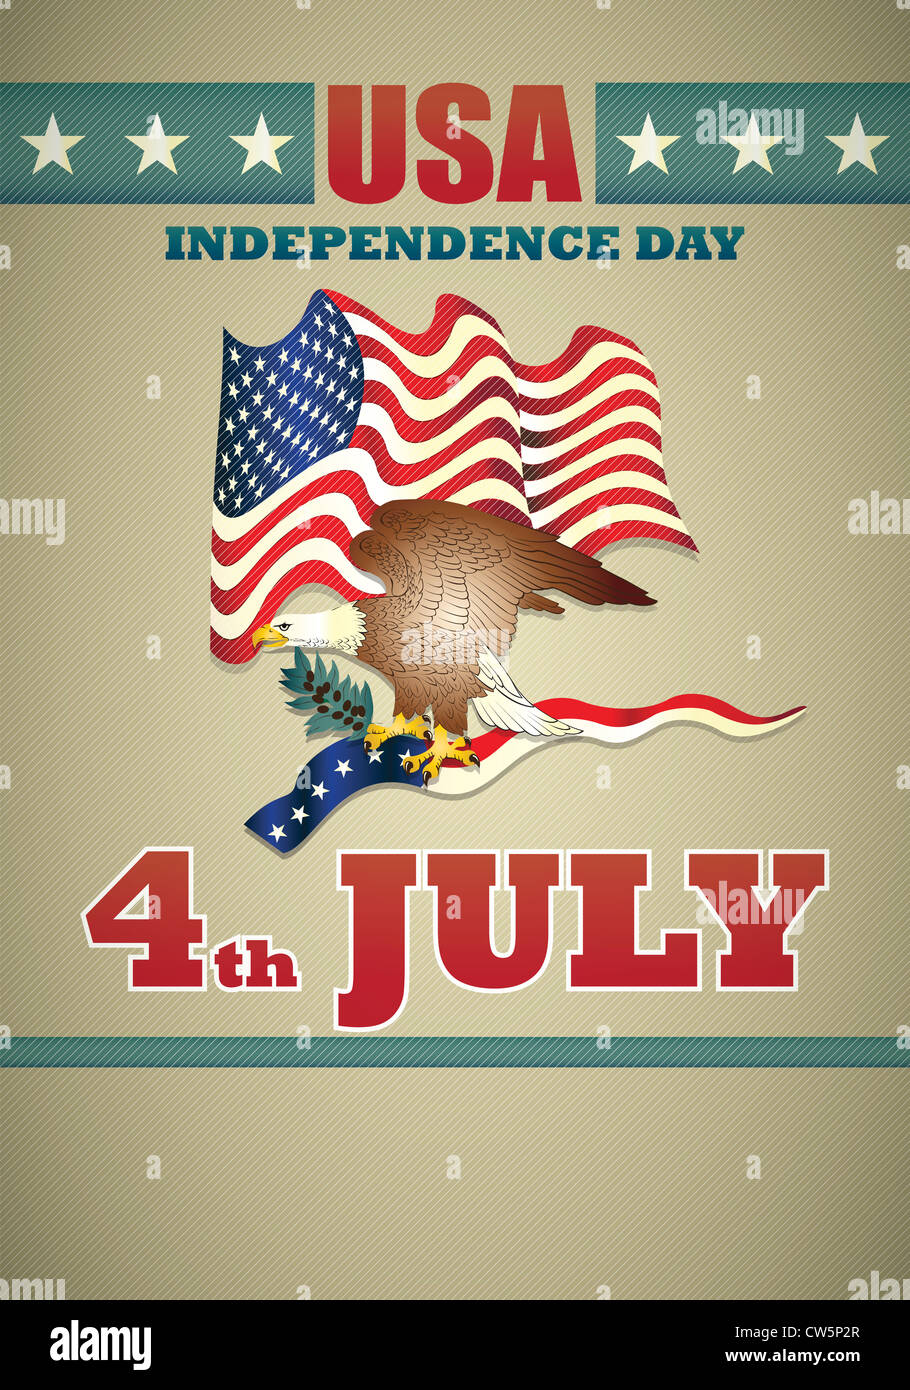 poster of independence day usa Stock Photo